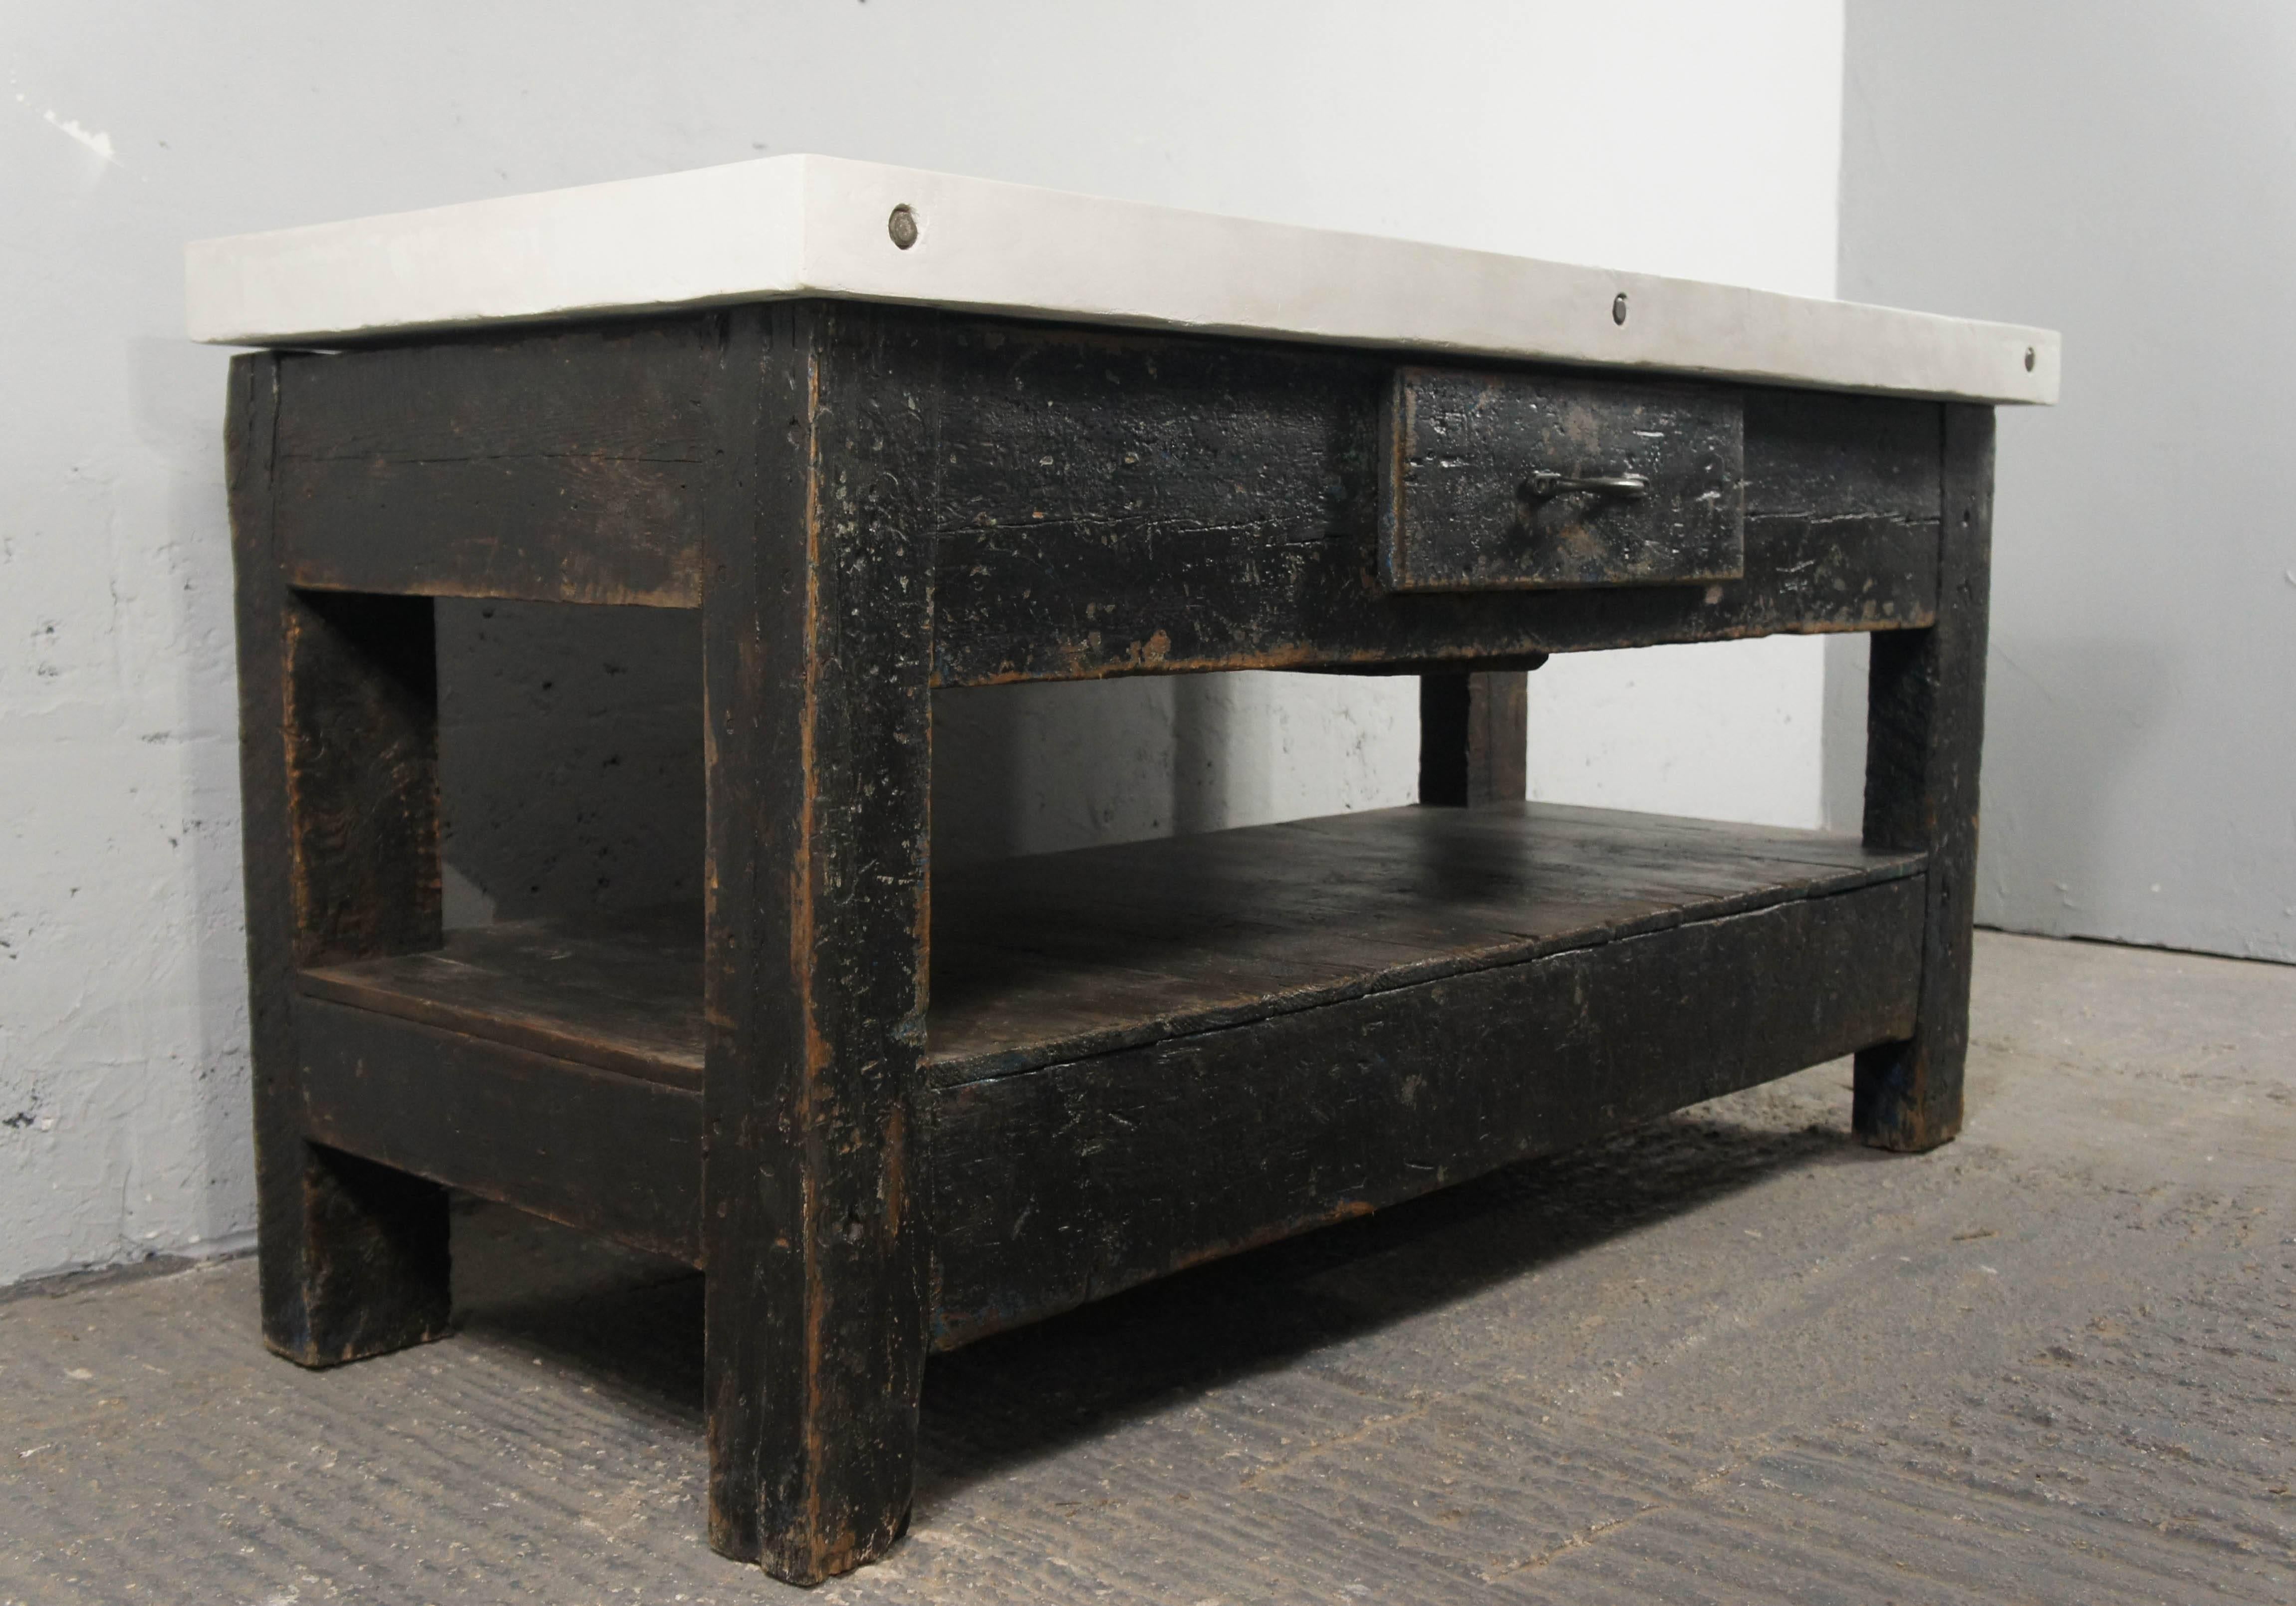 We salvaged a pair of these great workbenches from a steel factory in Sheffield, England; so they have lots of original character and history. 
We have teamed the bases up with modern cement resin tops, handmade by ourselves. The slightly off-white